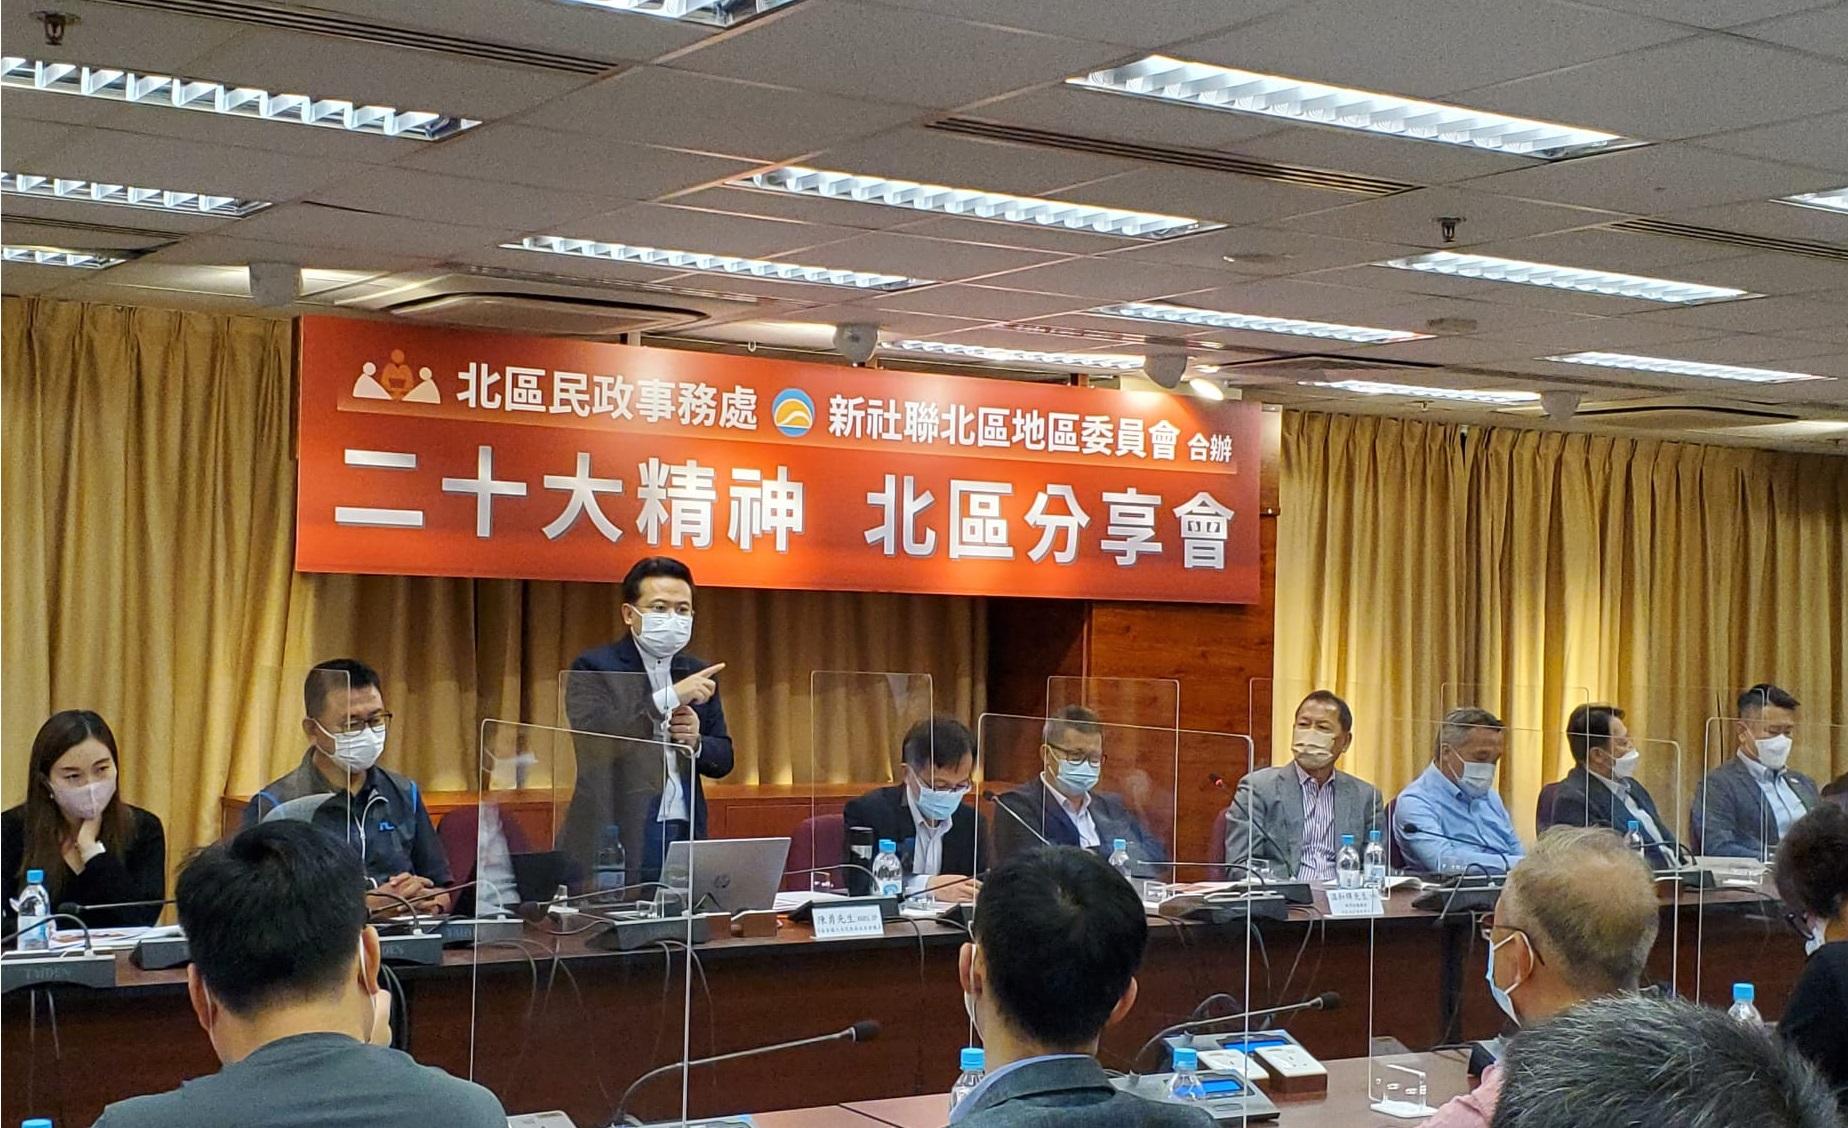 The North District Office, together with the New Territories Association of Societies, North District Committee, held a session on "Essence of the 20th National Congress of the CPC" at North District Office conference room today (October 31). Photo shows Hong Kong Deputy to the National People's Congress and member of the Legislative Council, Mr Chan Yung (third left), sharing and exchanging his views on the spirit of the 20th National Congress of the CPC with the participants.